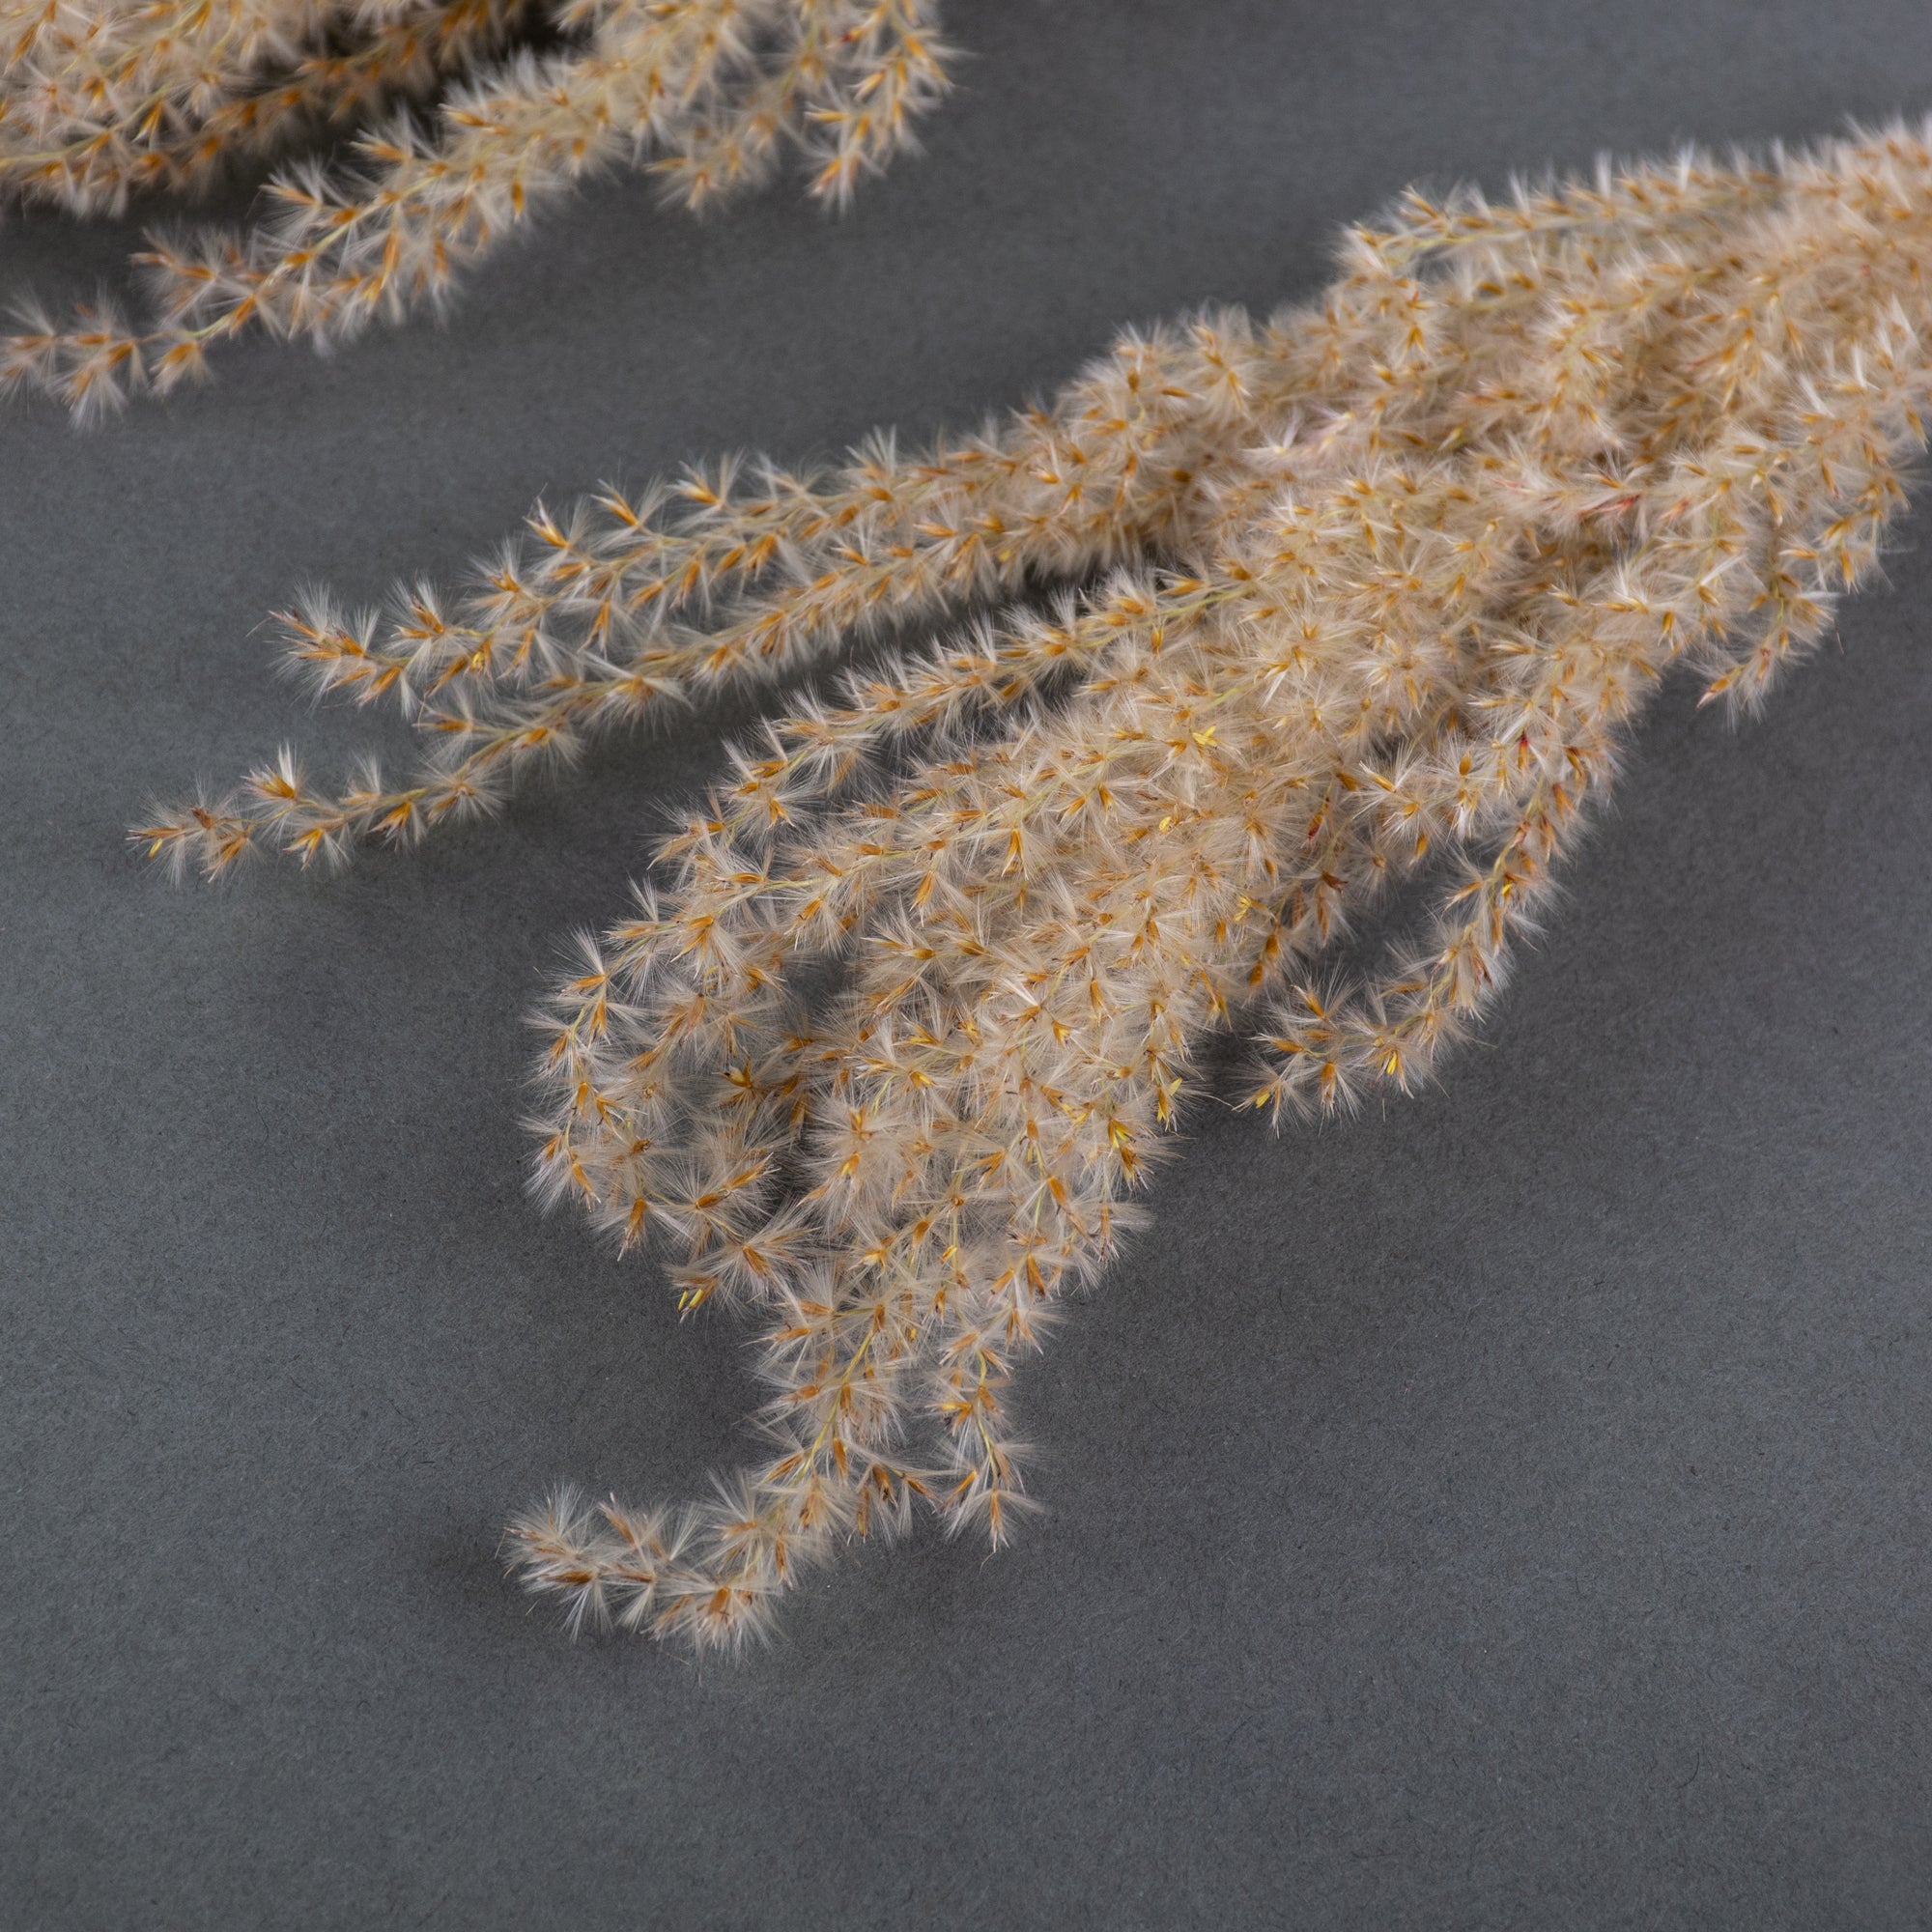 This image shows a bunch of fluffy reed grass against a grey background